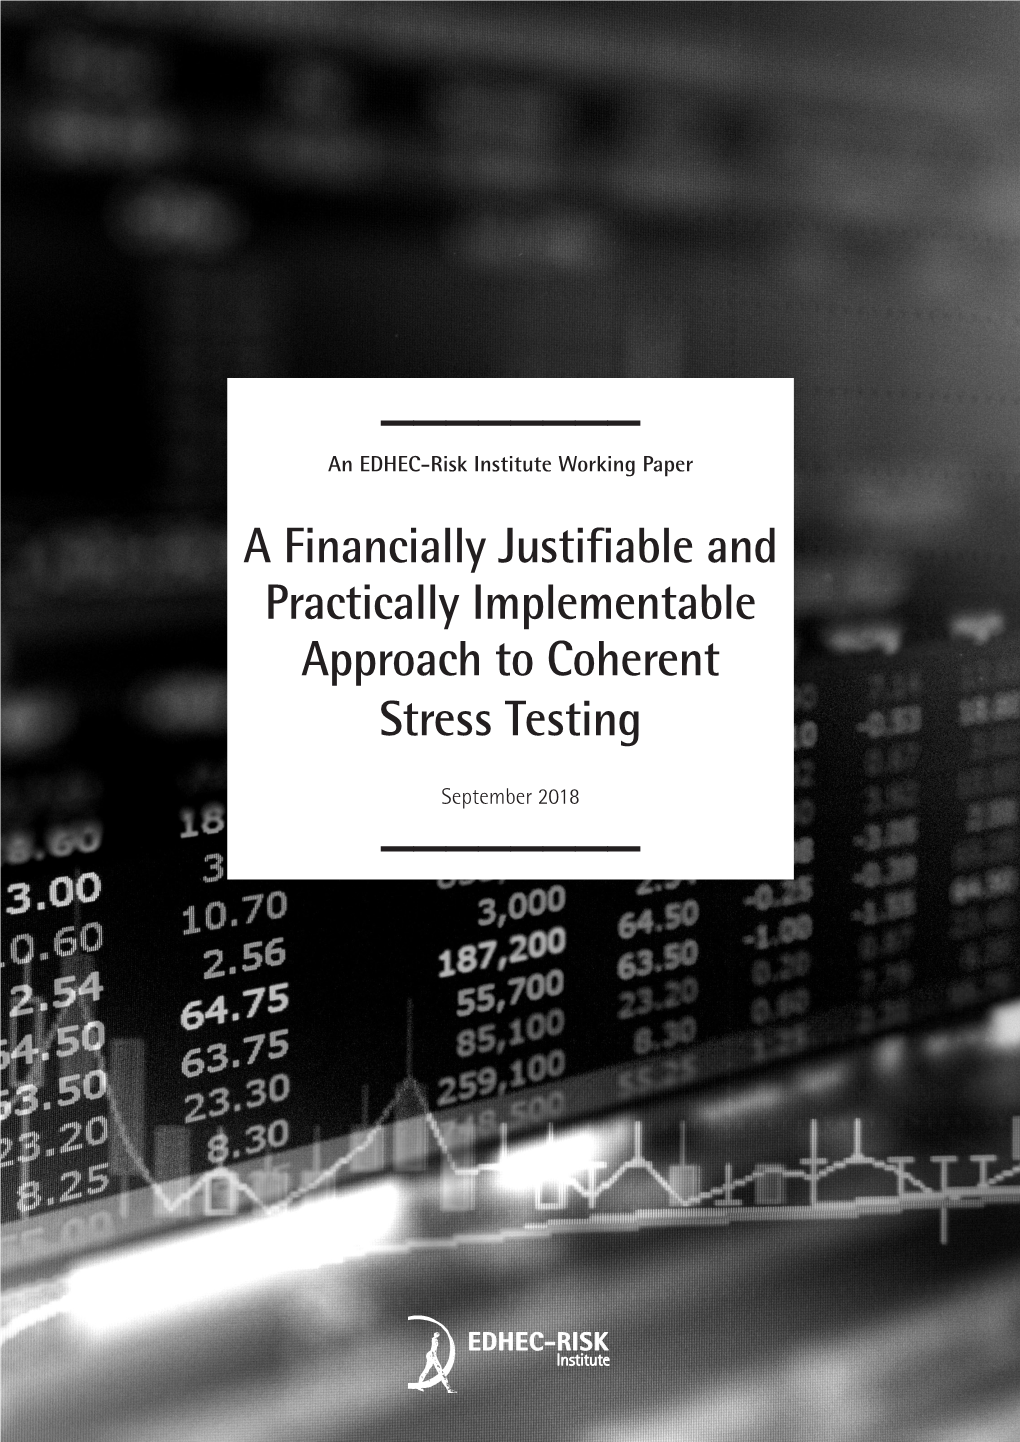 A Financially Justifiable and Practically Implementable Approach to Coherent Stress Testing